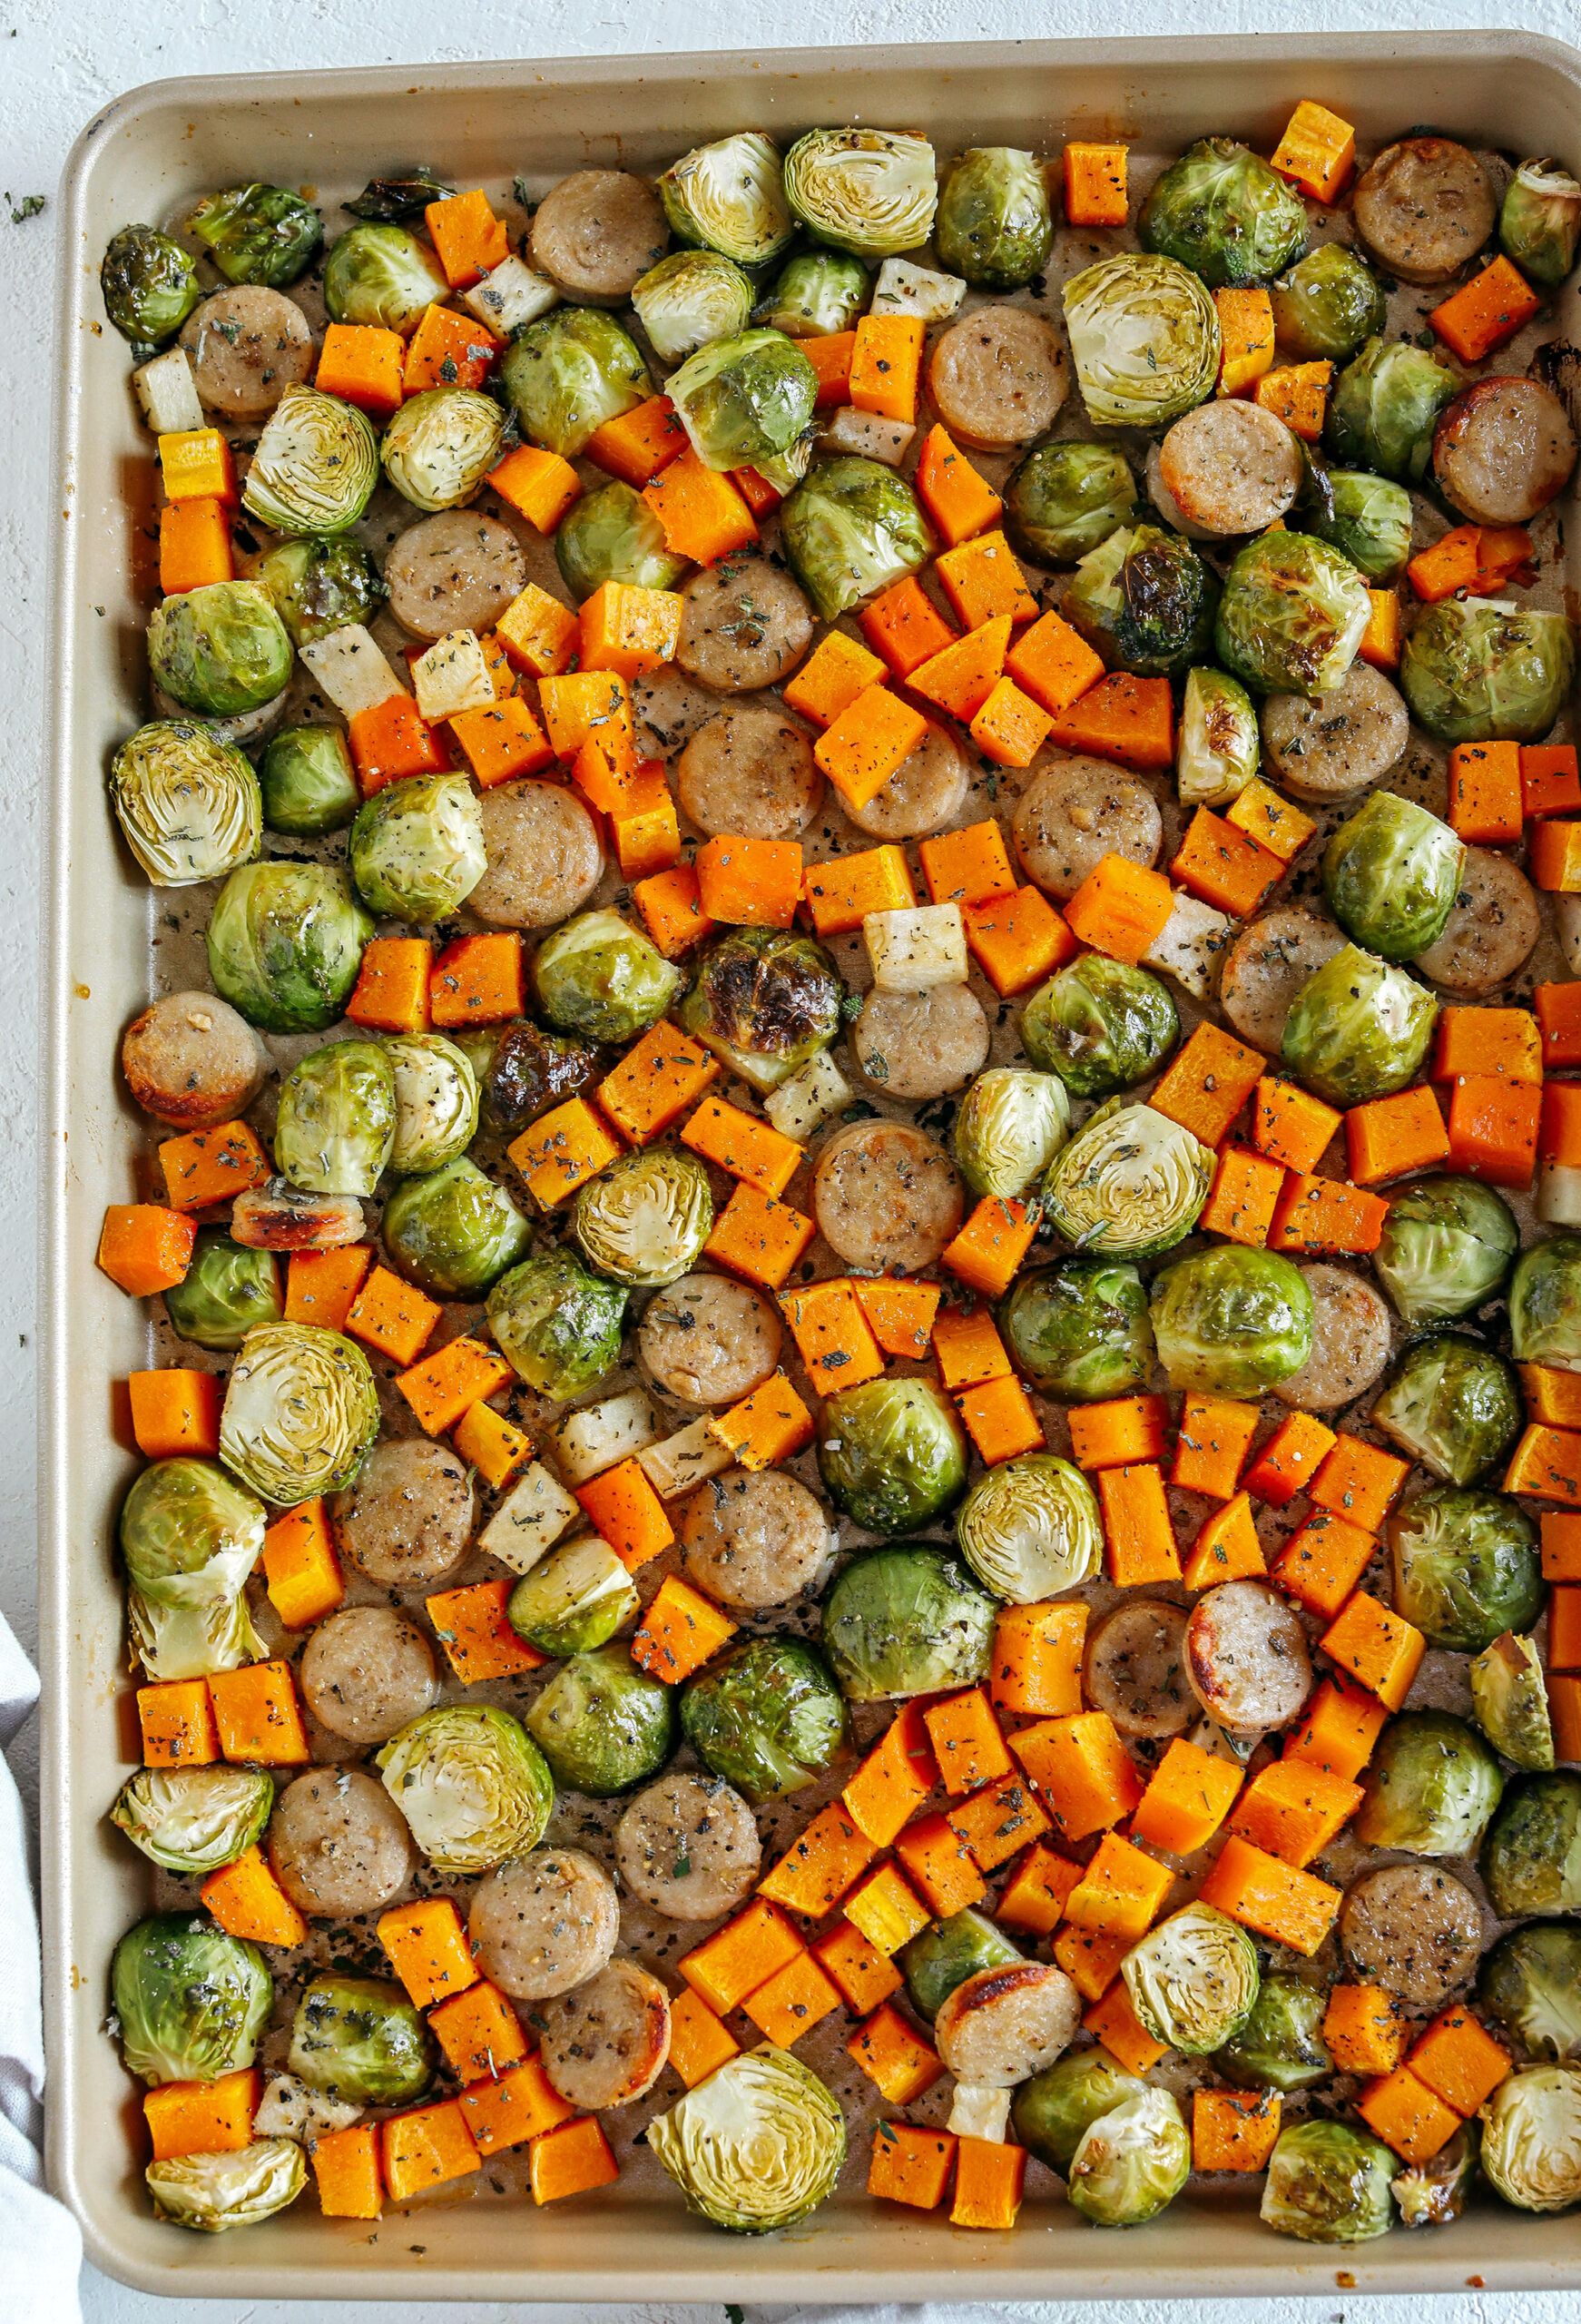 Harvest Sheet Pan Sausage and Veggies loaded with flavorful chicken sausage, butternut squash, brussels sprouts, and apples for a quick and easy dinner made in just 30 minutes!  Roasted in a maple mustard glaze and fresh herbs for the perfect fall meal!  